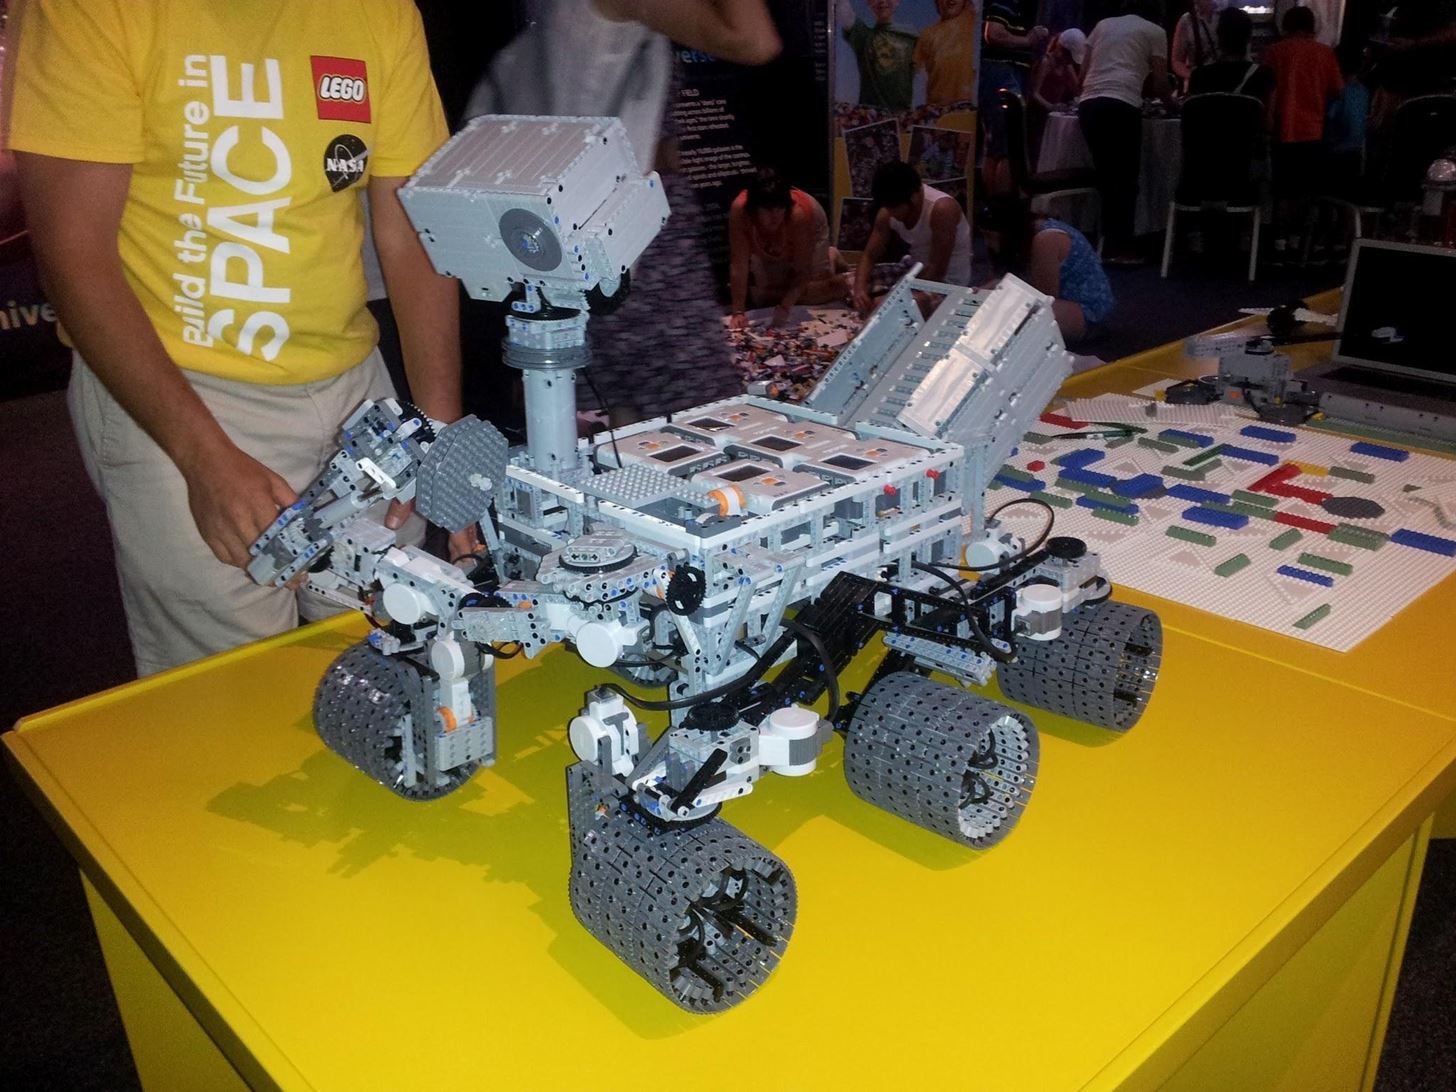 NASA's Curiosity Just Got Bricked! Working LEGO Mars Rover Ready for Exploration